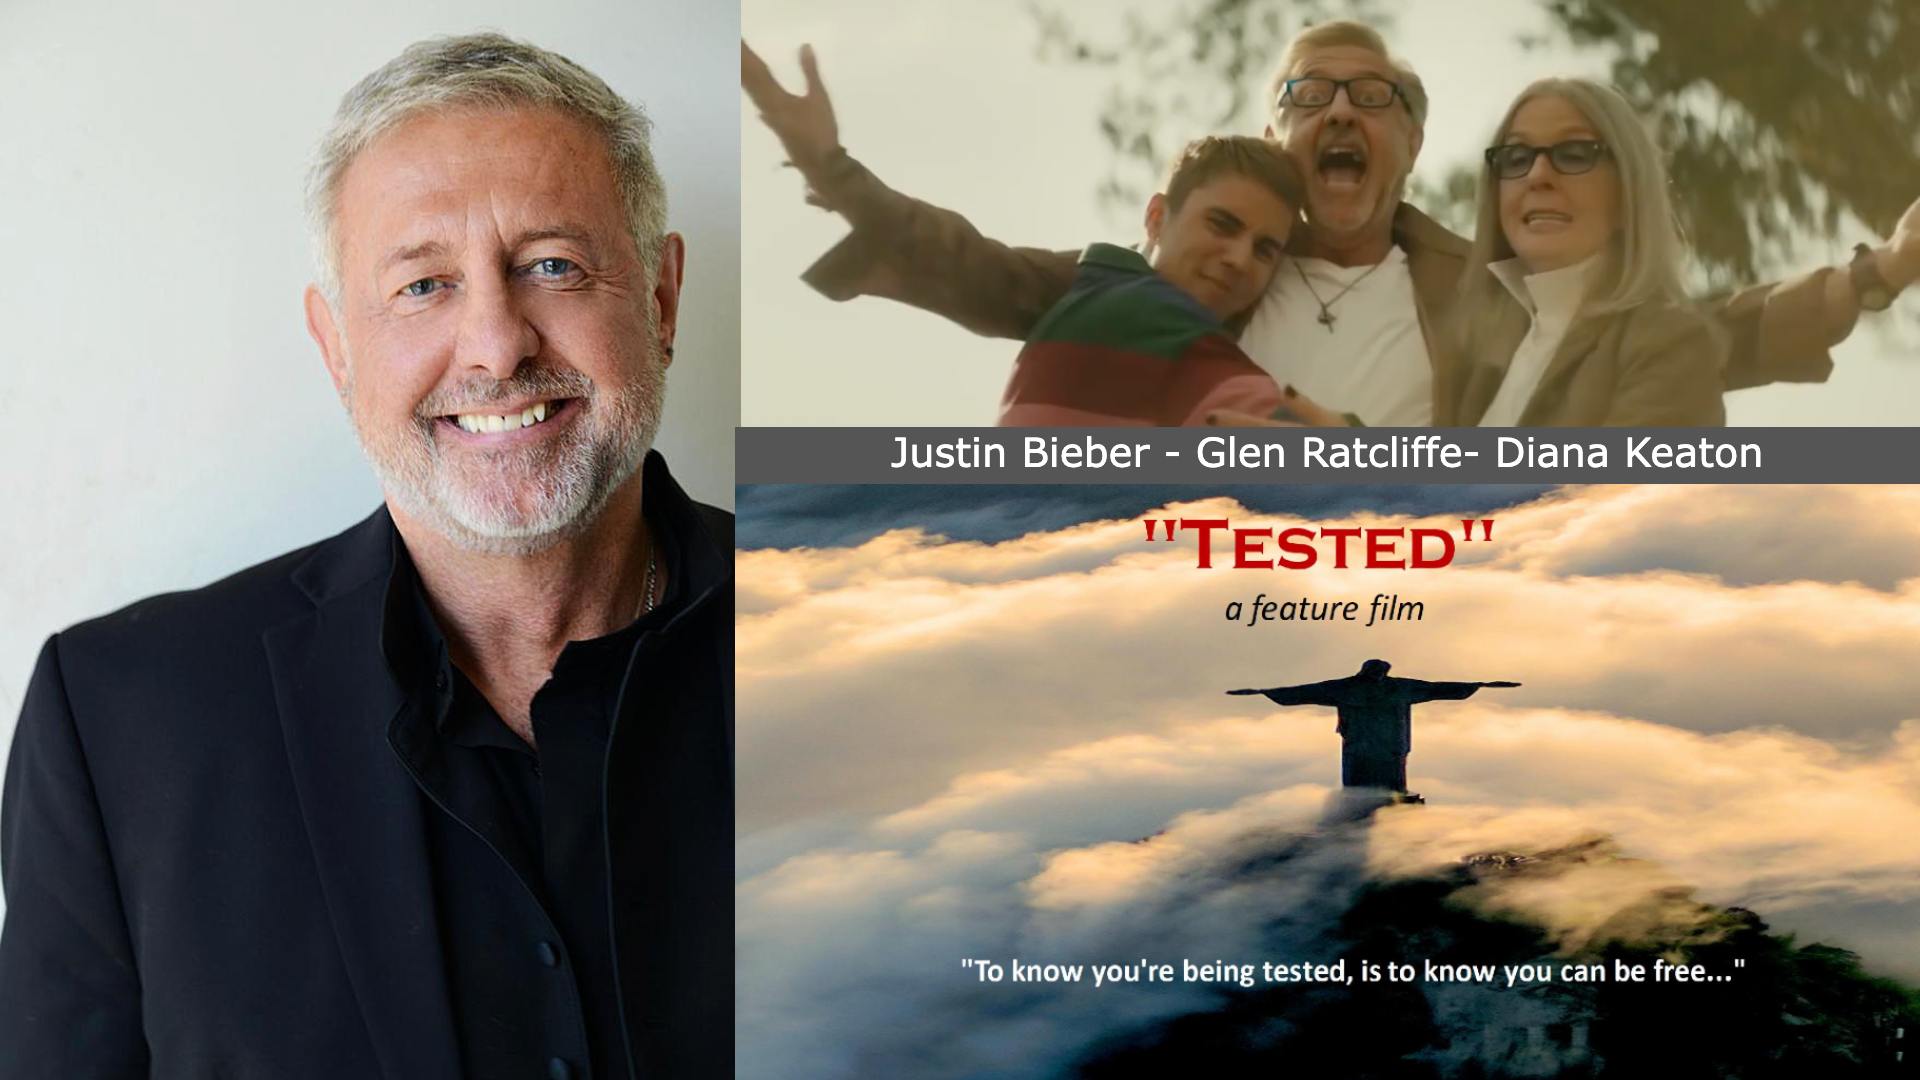 HOLLYWOOD NEWS: ACTOR AND PRODUCER GLENN RATCLIFFE EXCEEDS 100MILLION VIEWS STARRING IN JUSTIN BIEBER’S “GHOST” & MORE ON HIS LATEST FILM “TESTED” CHANGING THE WORLD!